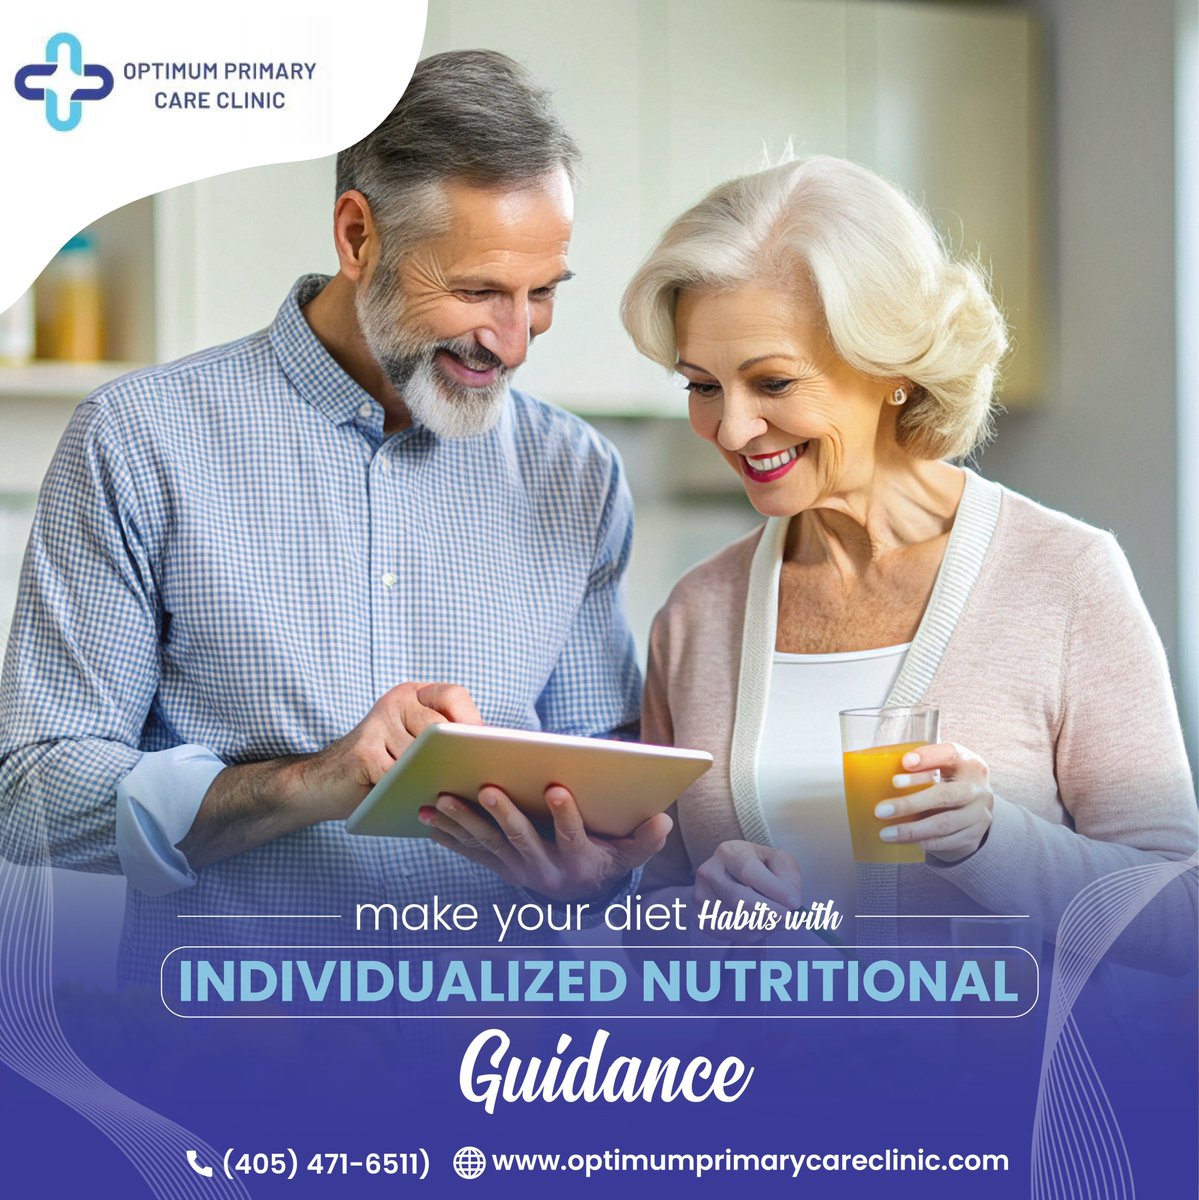 Our certified nutritionists at Optimum Primary Care work closely with you to assess your dietary habits, medical history, and lifestyle factors ✨🥗. 
#optimumprimarycare #nutritionalcounseling #certifiednutritionists #registereddietitians